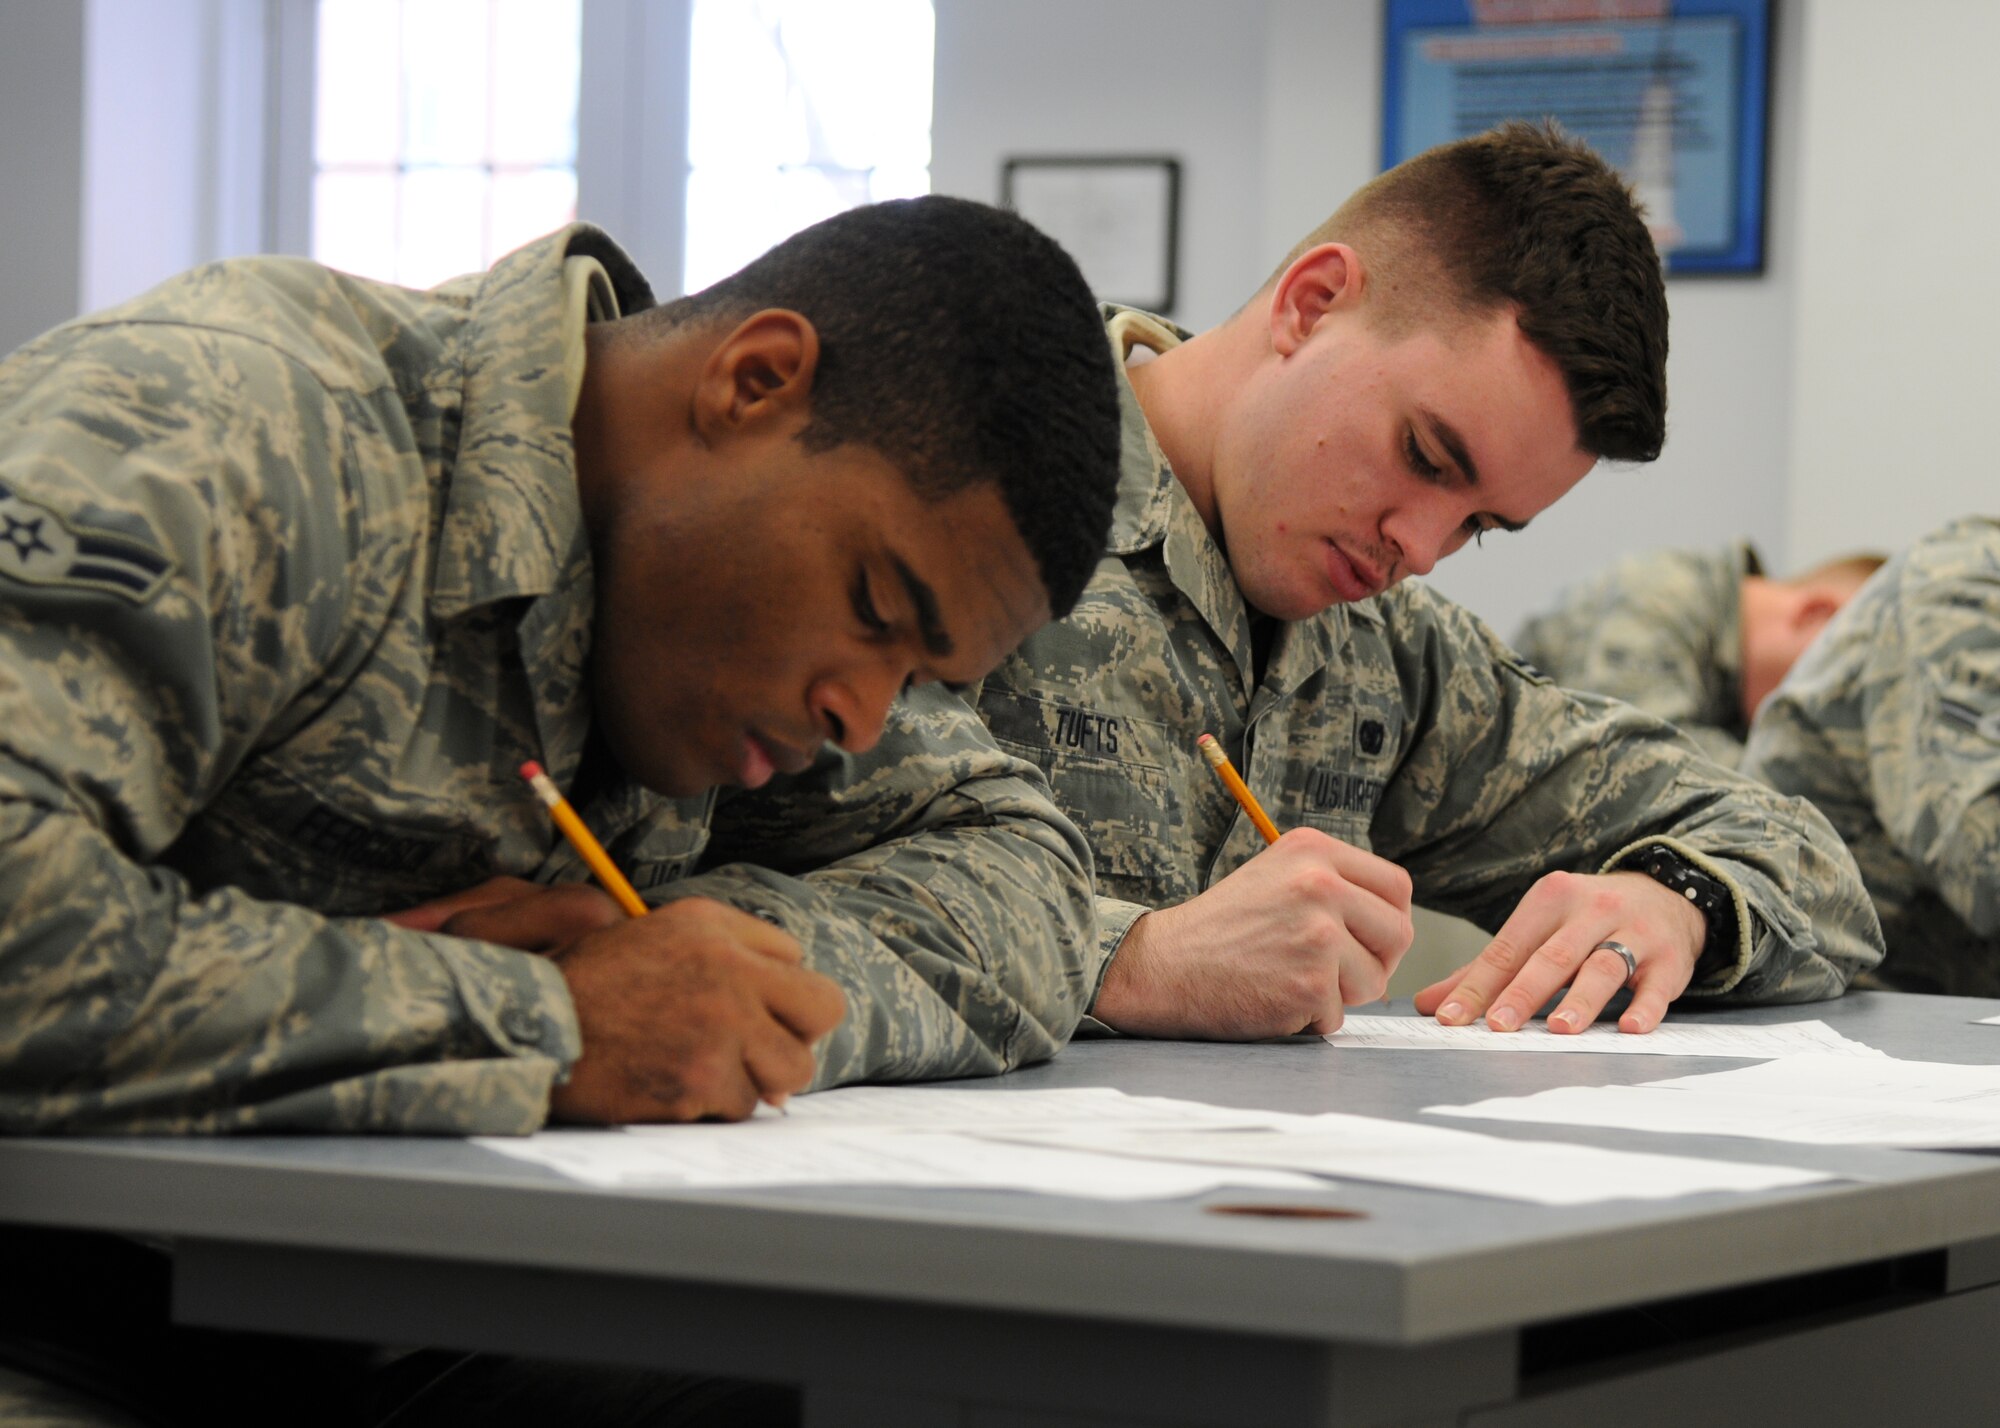 Airmen 1st Class Akeem Ferguson and Kevin Tufts fill out paperwork during their Unit Orientation Training Dec. 22, 2014, on F.E. Warren Air Force Base, Wyo. During the training, security forces members learn the basic skills they need to accomplish the mission.  Ferguson and Tufts are with the 90th Missile Security Forces Squadron. (U.S. Air Force photo/Airman 1st Class Malcolm Mayfield)